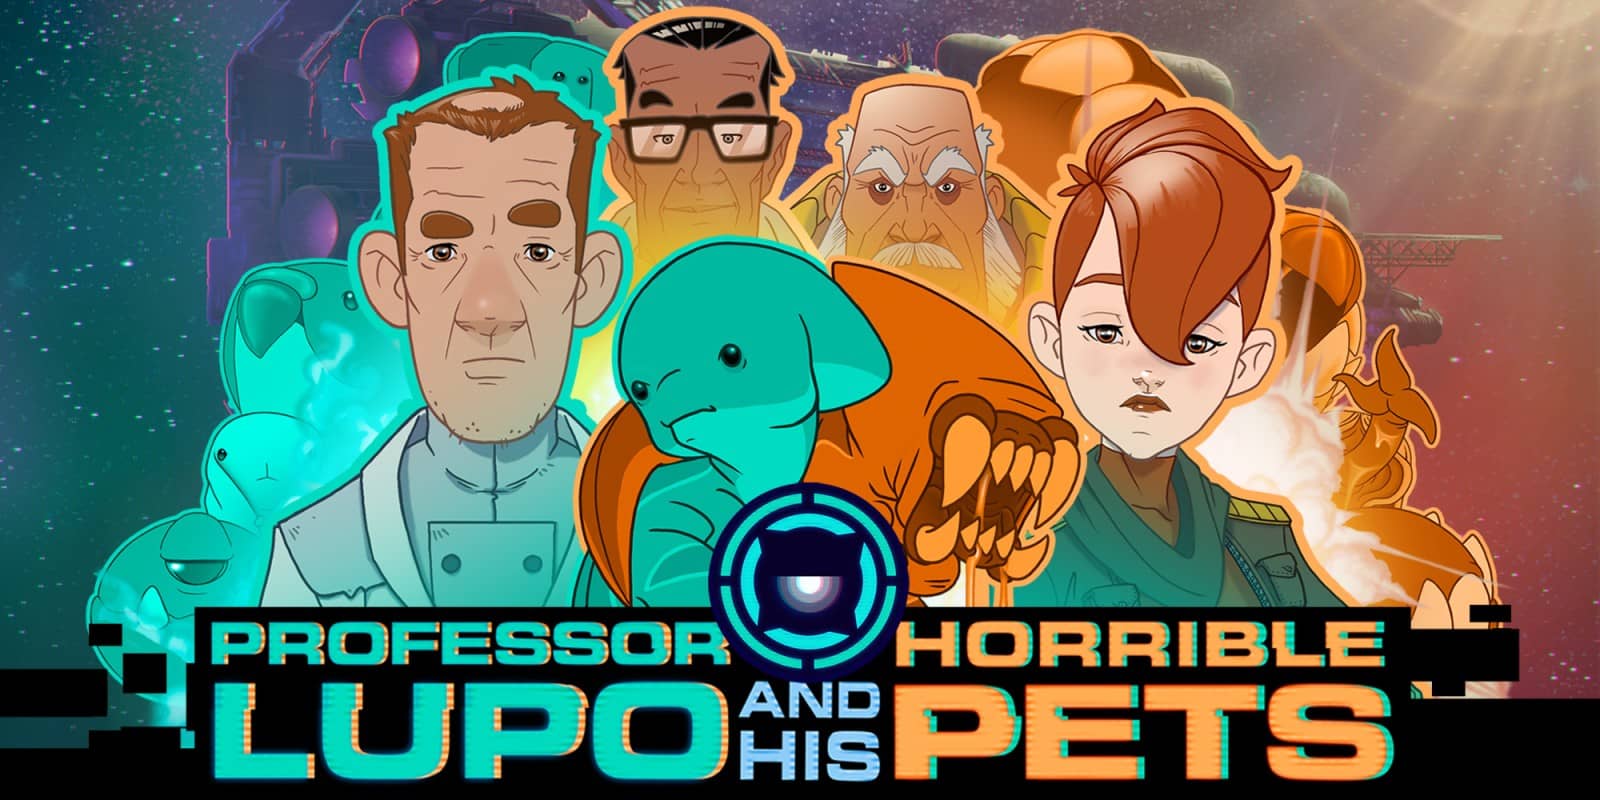 Read more about the article Professor Lupo and His Horrible pets Review [PC]